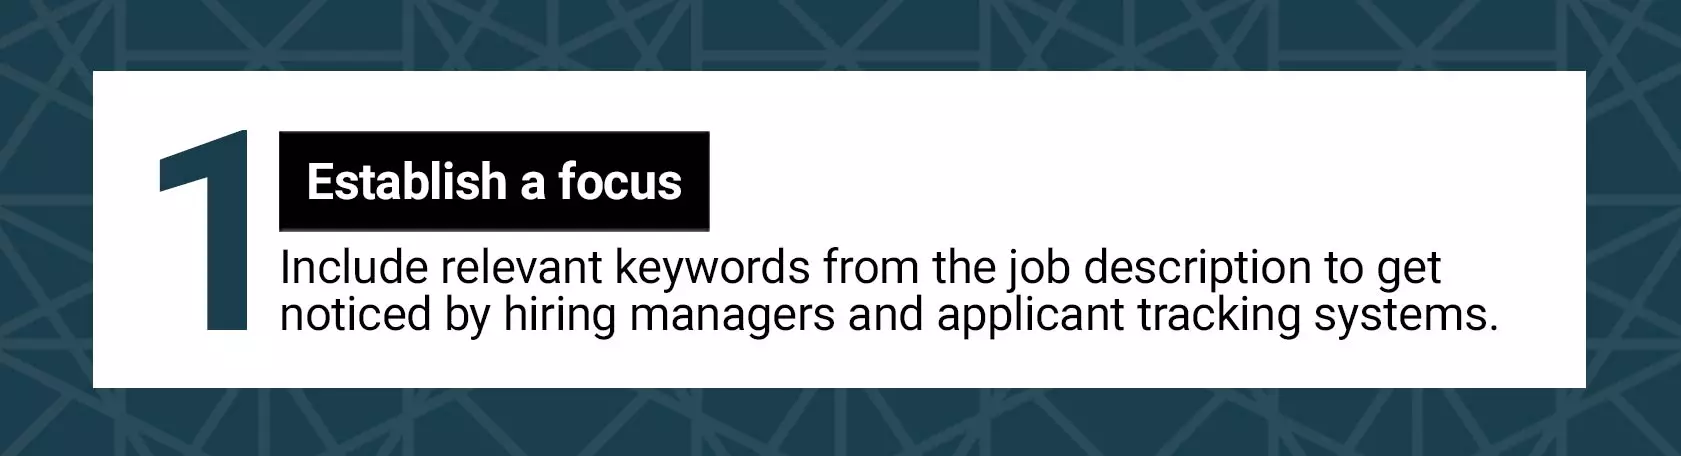 1. Establish a focus. Include relevant keywords from the job description to get noticed by hiring managers and applicant tracking systems.